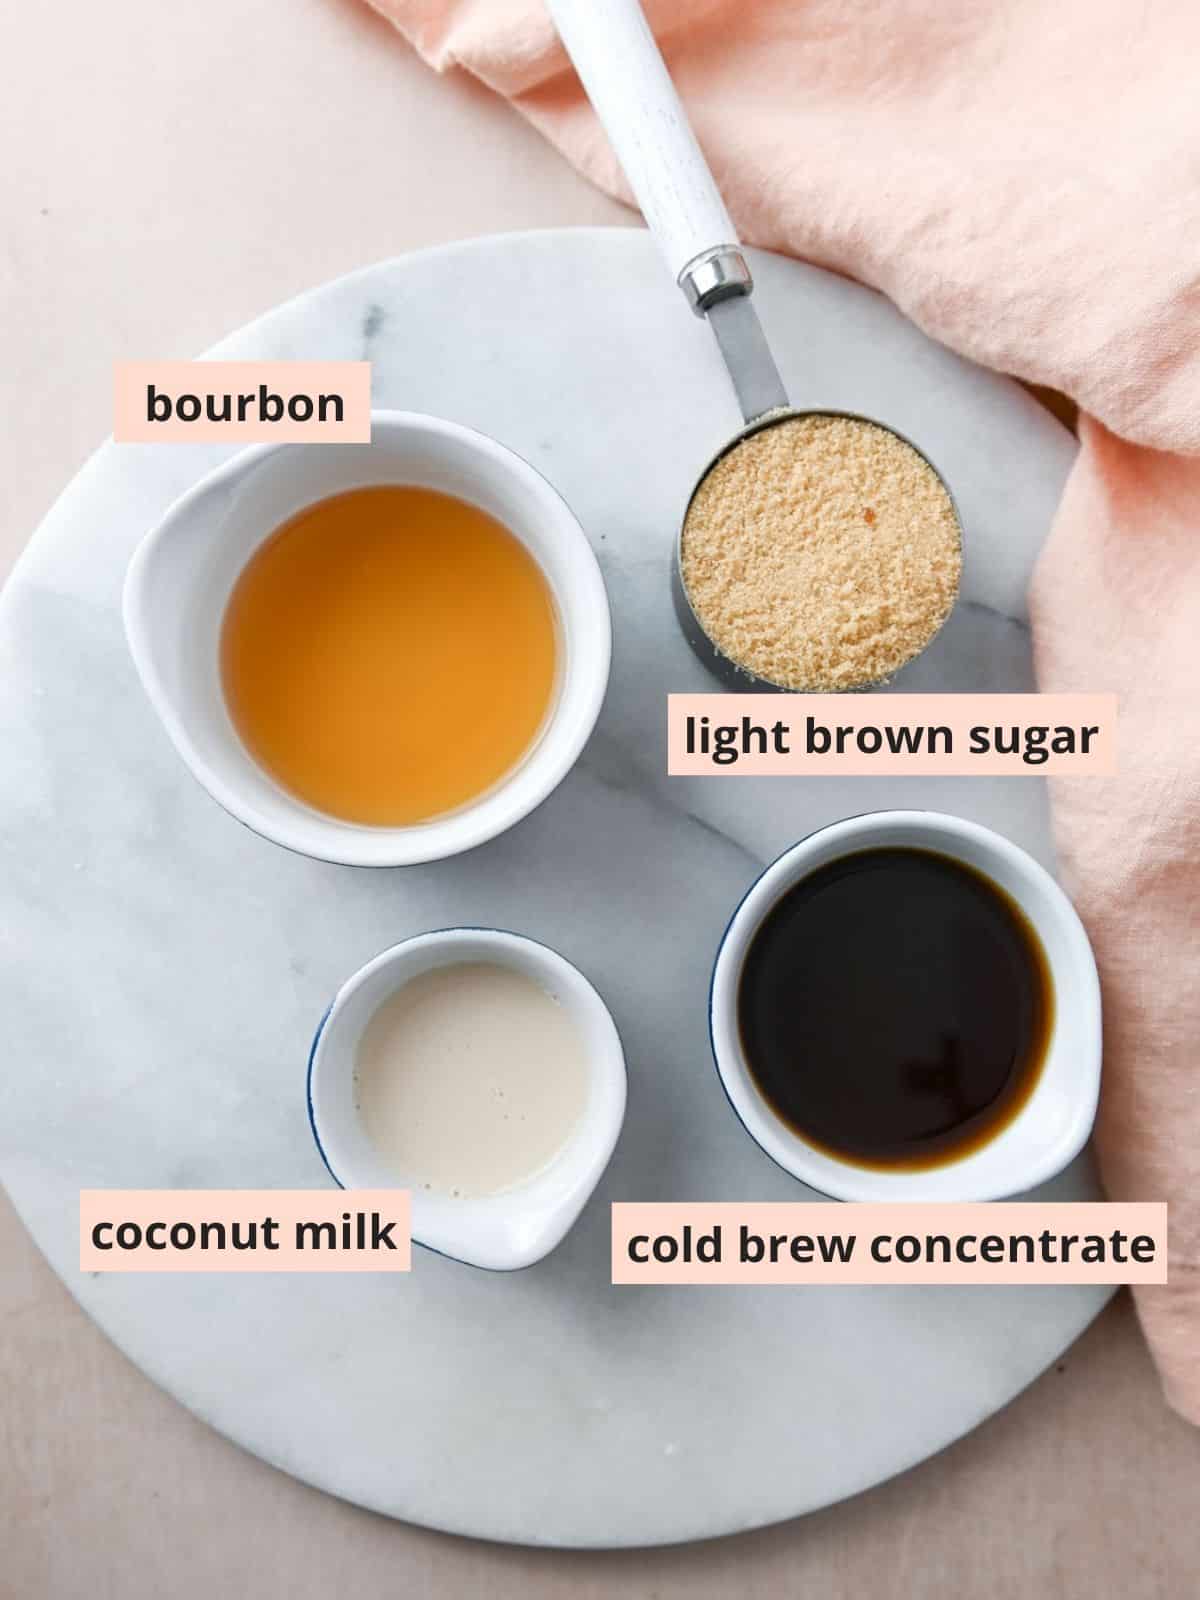 Labeled ingredients used to make cold brew cocktail.